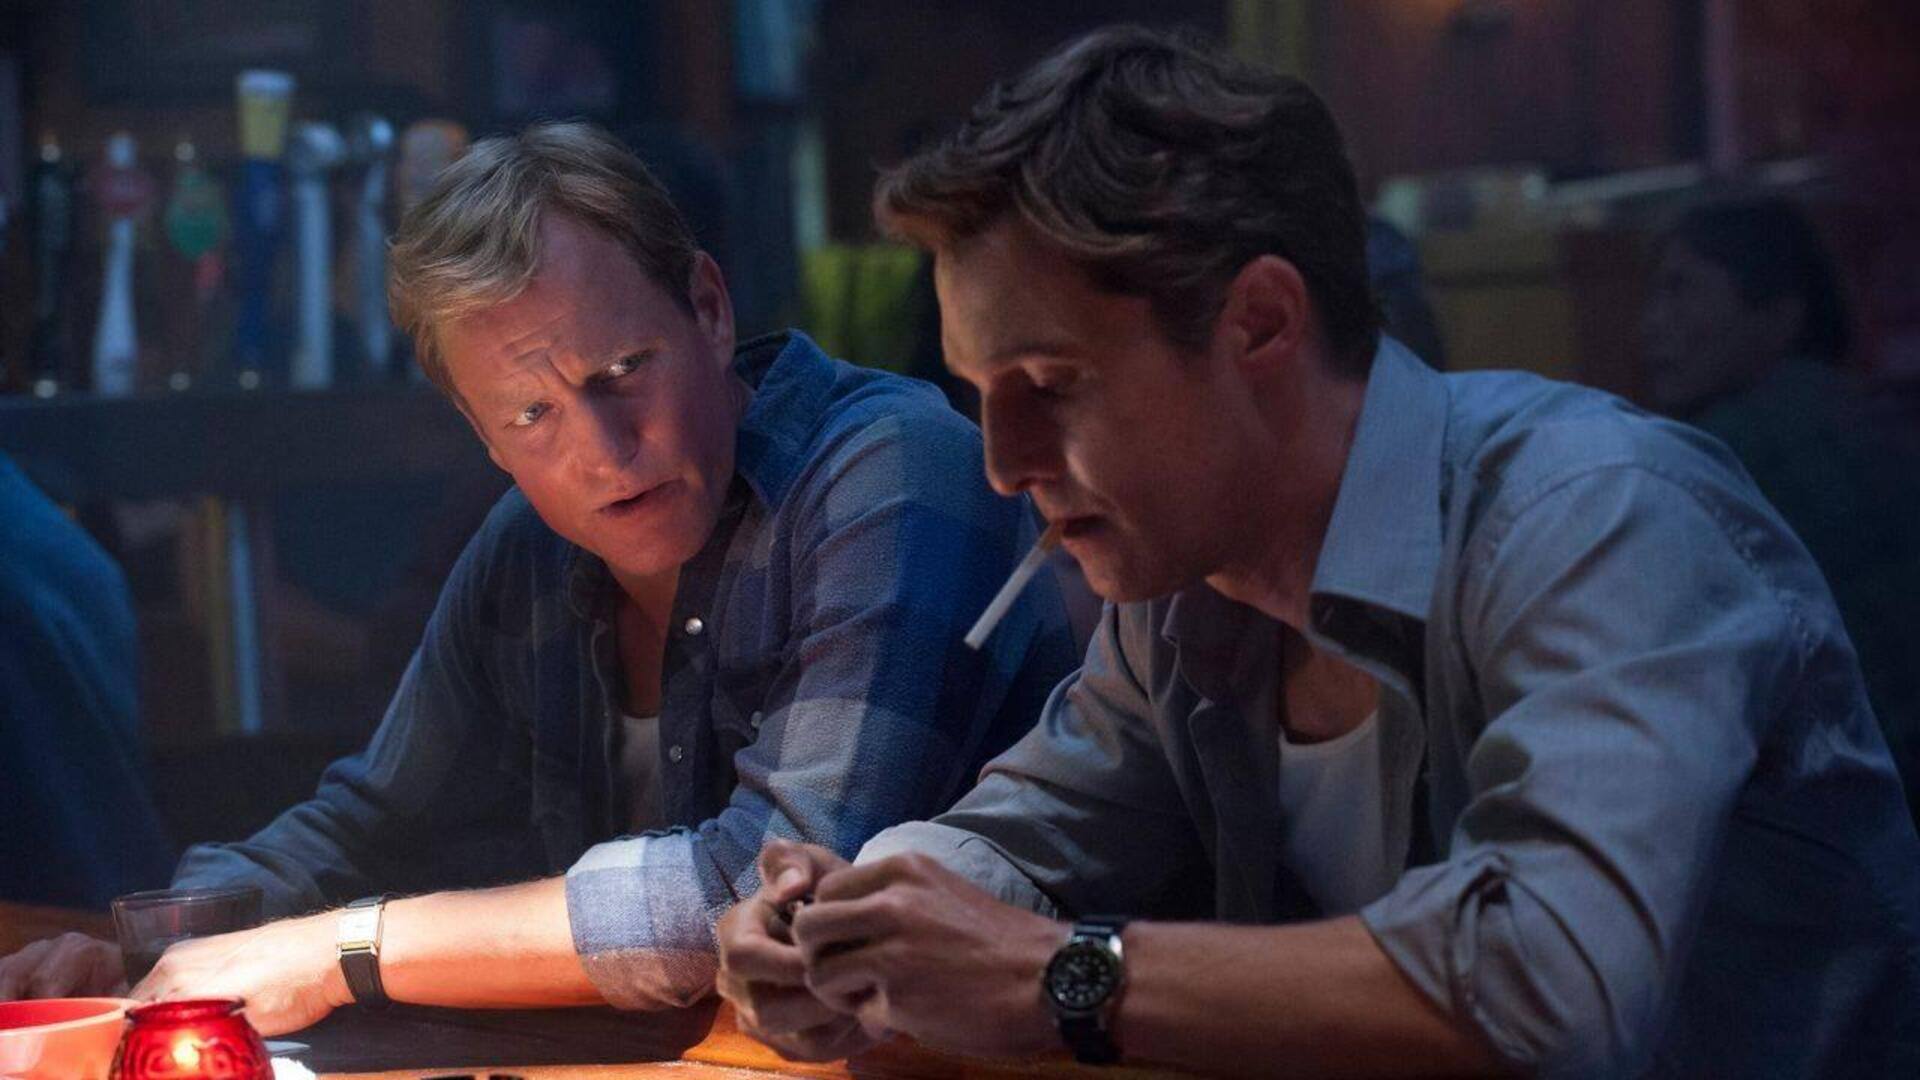 'The Wire' to 'True Detective': Best IMDb-rated crime drama shows